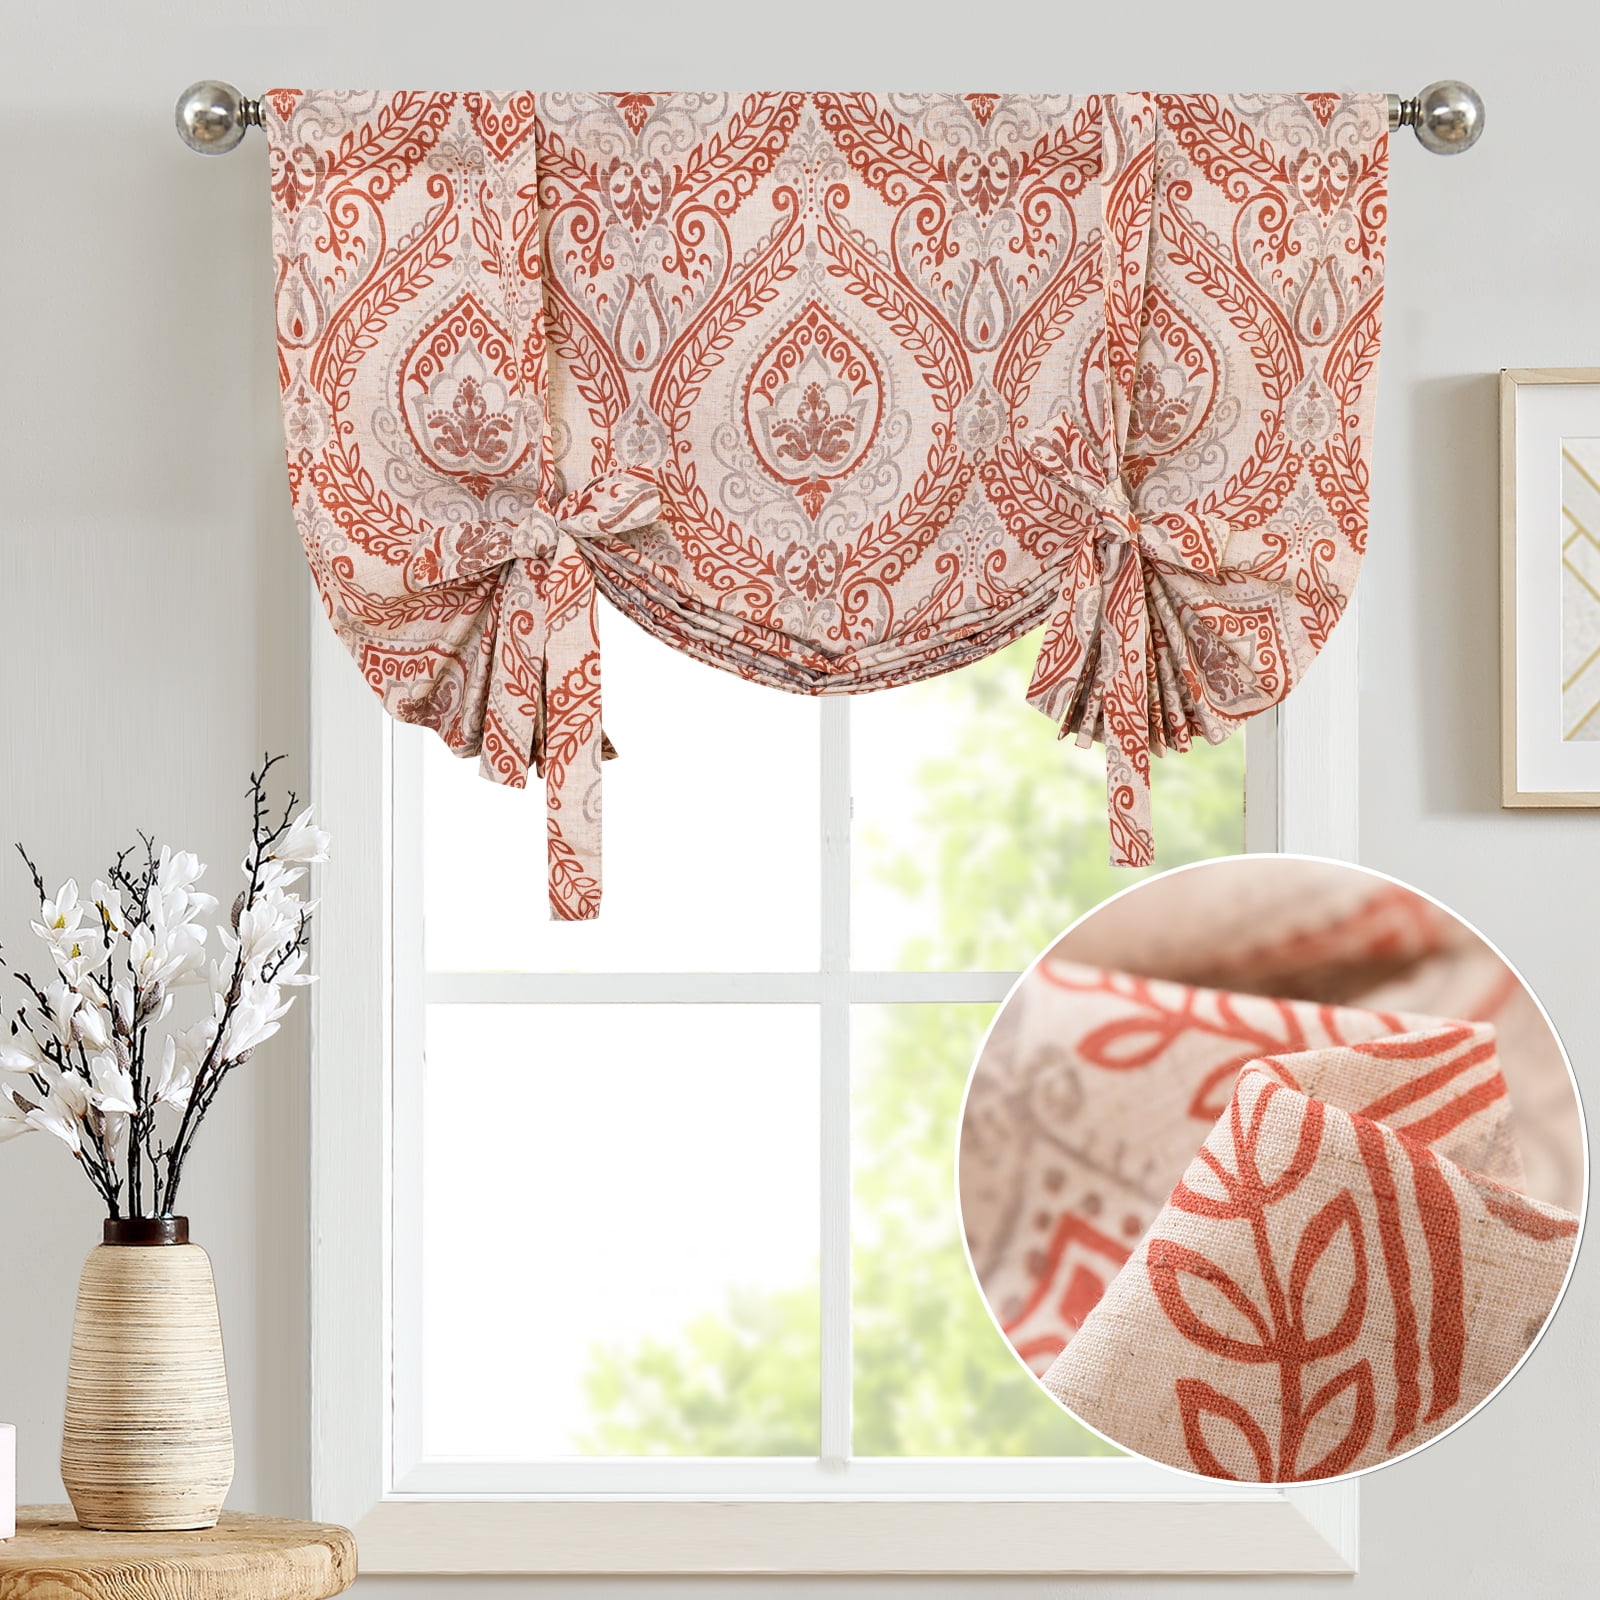 Curtainking 45 Inch Tie Up Valance Damask Linen For Kitchen Farmhouse Rod Pocket Medallion Curtain Living Room 1 Panel Red On Beige Ib Window Treatment Sheerness Com